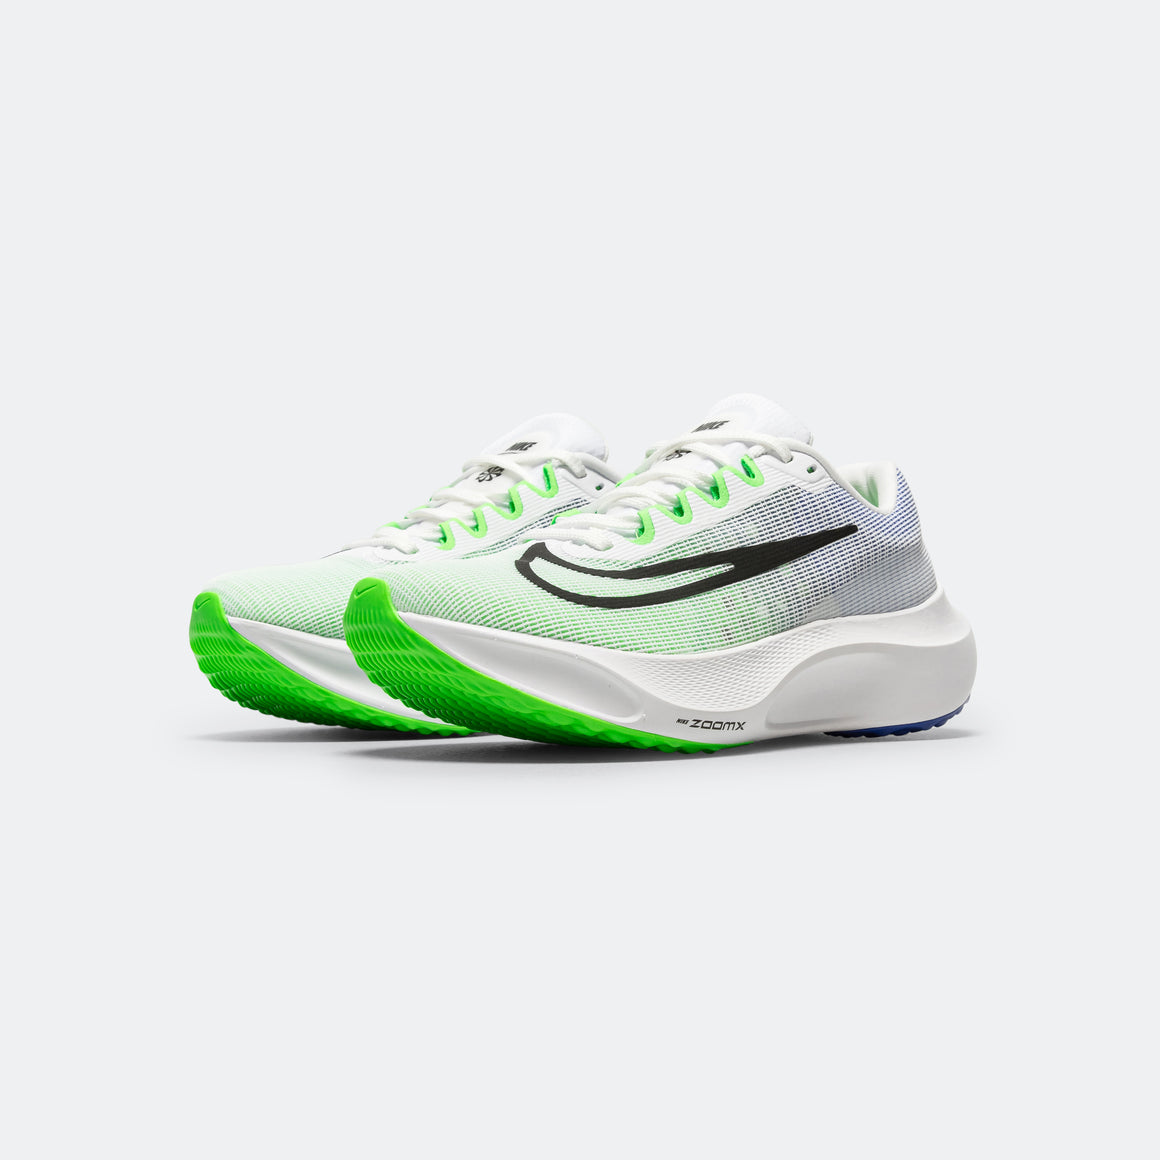 Nike - Mens Zoom Fly 5 - White/Black-Green Strike-Racer Blue - Up There Athletics